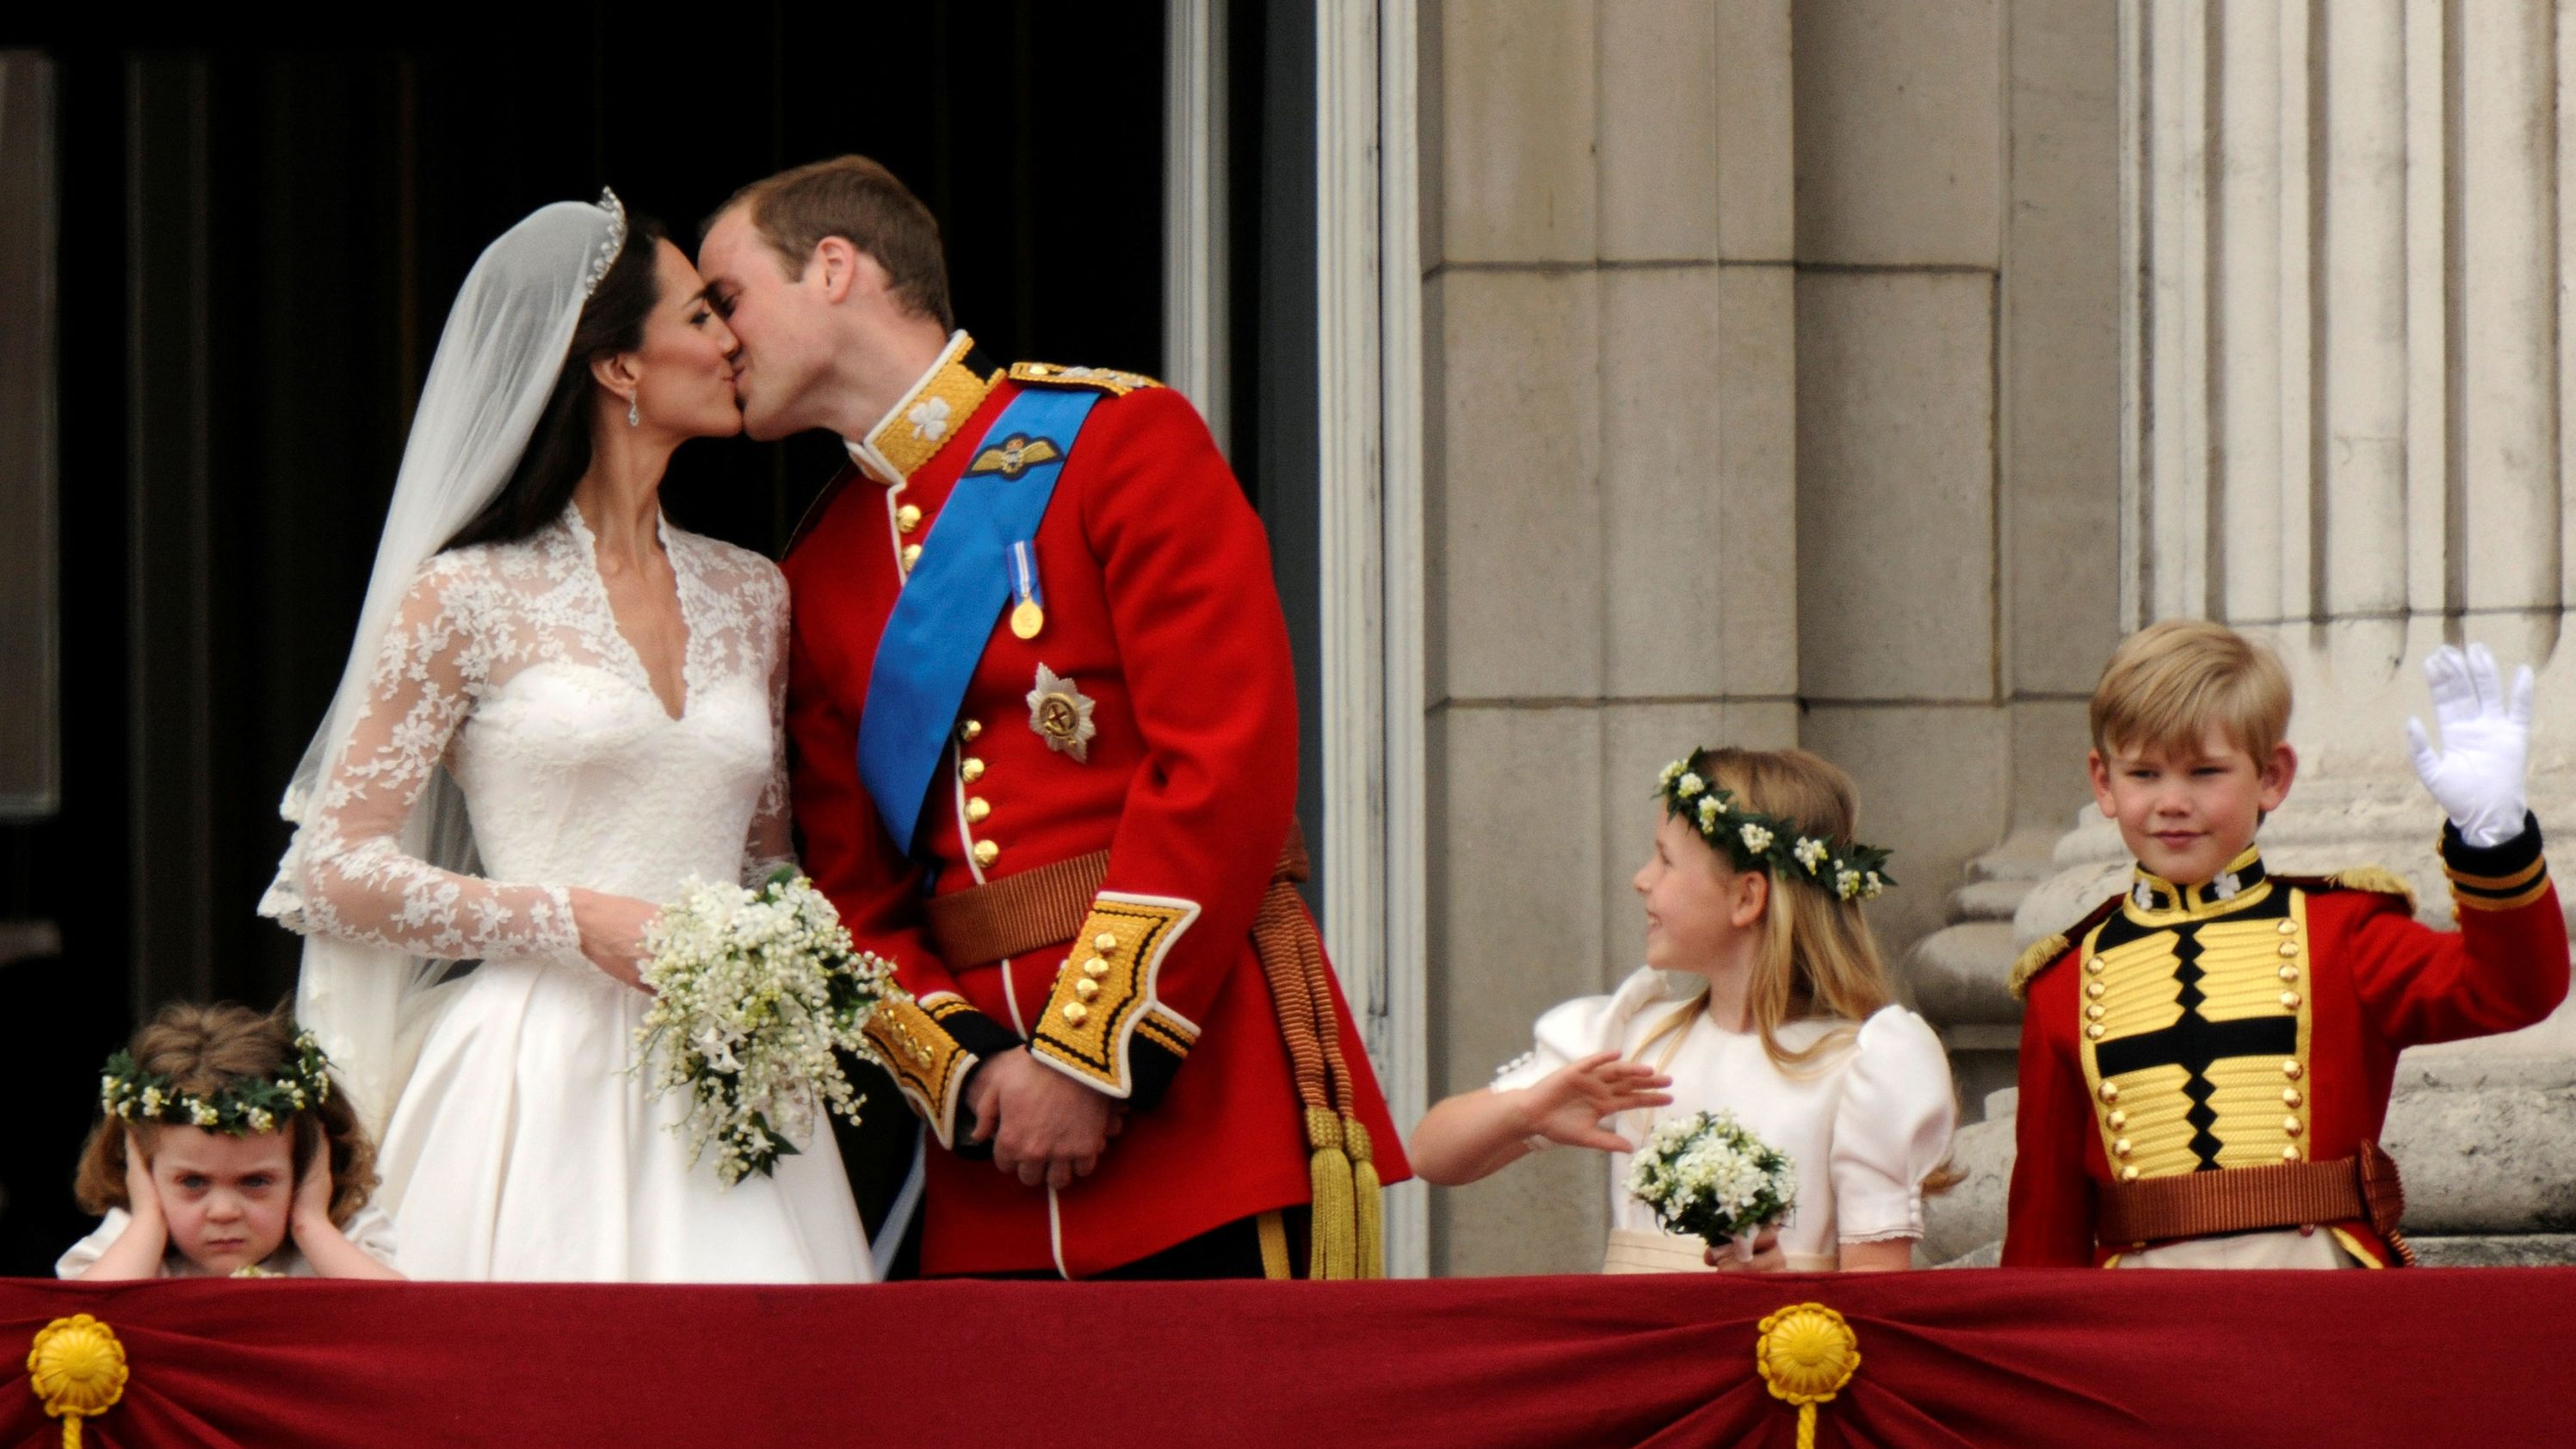 Britain's Prince William kisses his new wife, Catherine, on the balcony of Buckingham Palace in April 2011. <a href="https://www.cnn.com/2016/04/29/europe/will-kate-five-year-wedding-anniversary/index.html" target="_blank">The wedding</a> was watched by millions around the world.